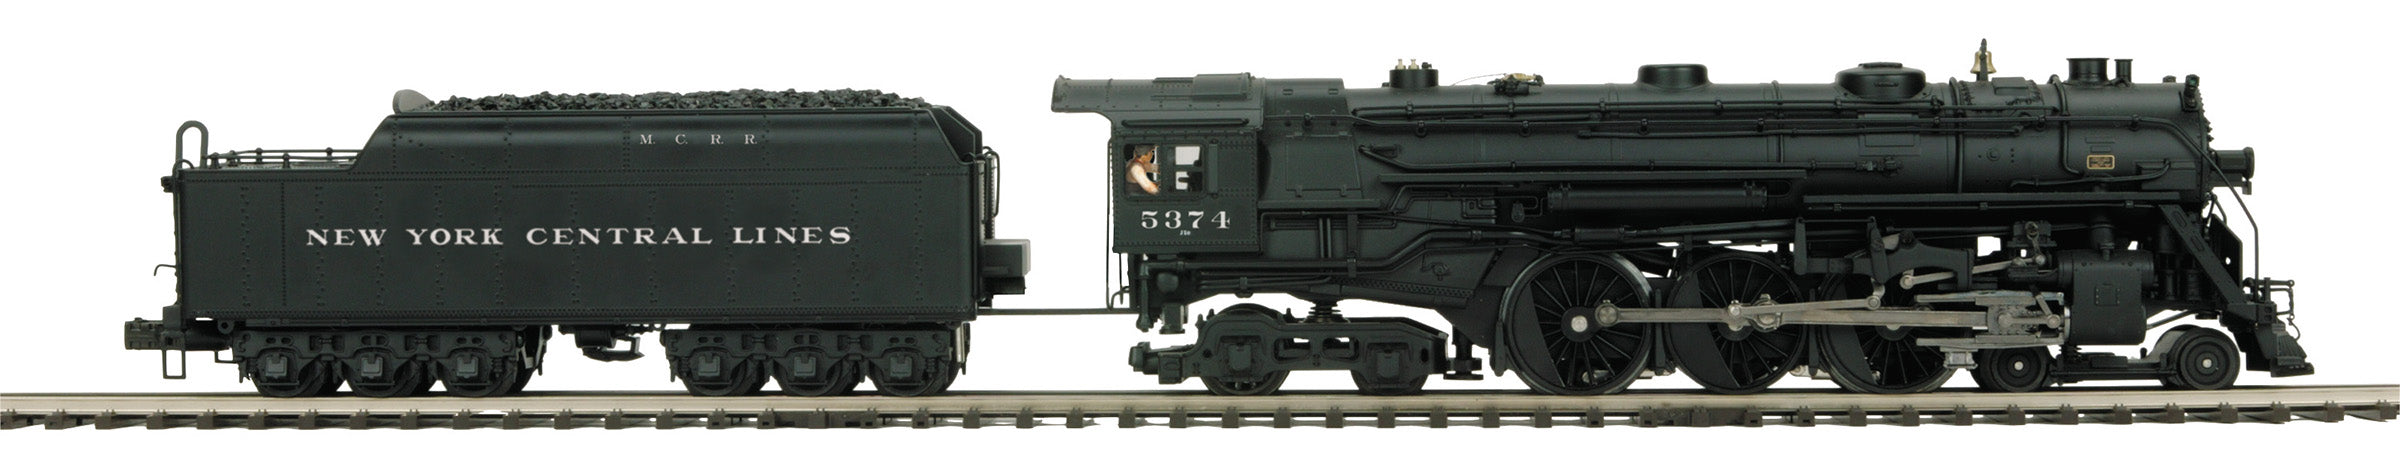 MTH 20-3866-1 - 4-6-4 J-1e Hudson Steam Engine "New York Central Lines" #8229 w/ PS3 (Michigan Central)